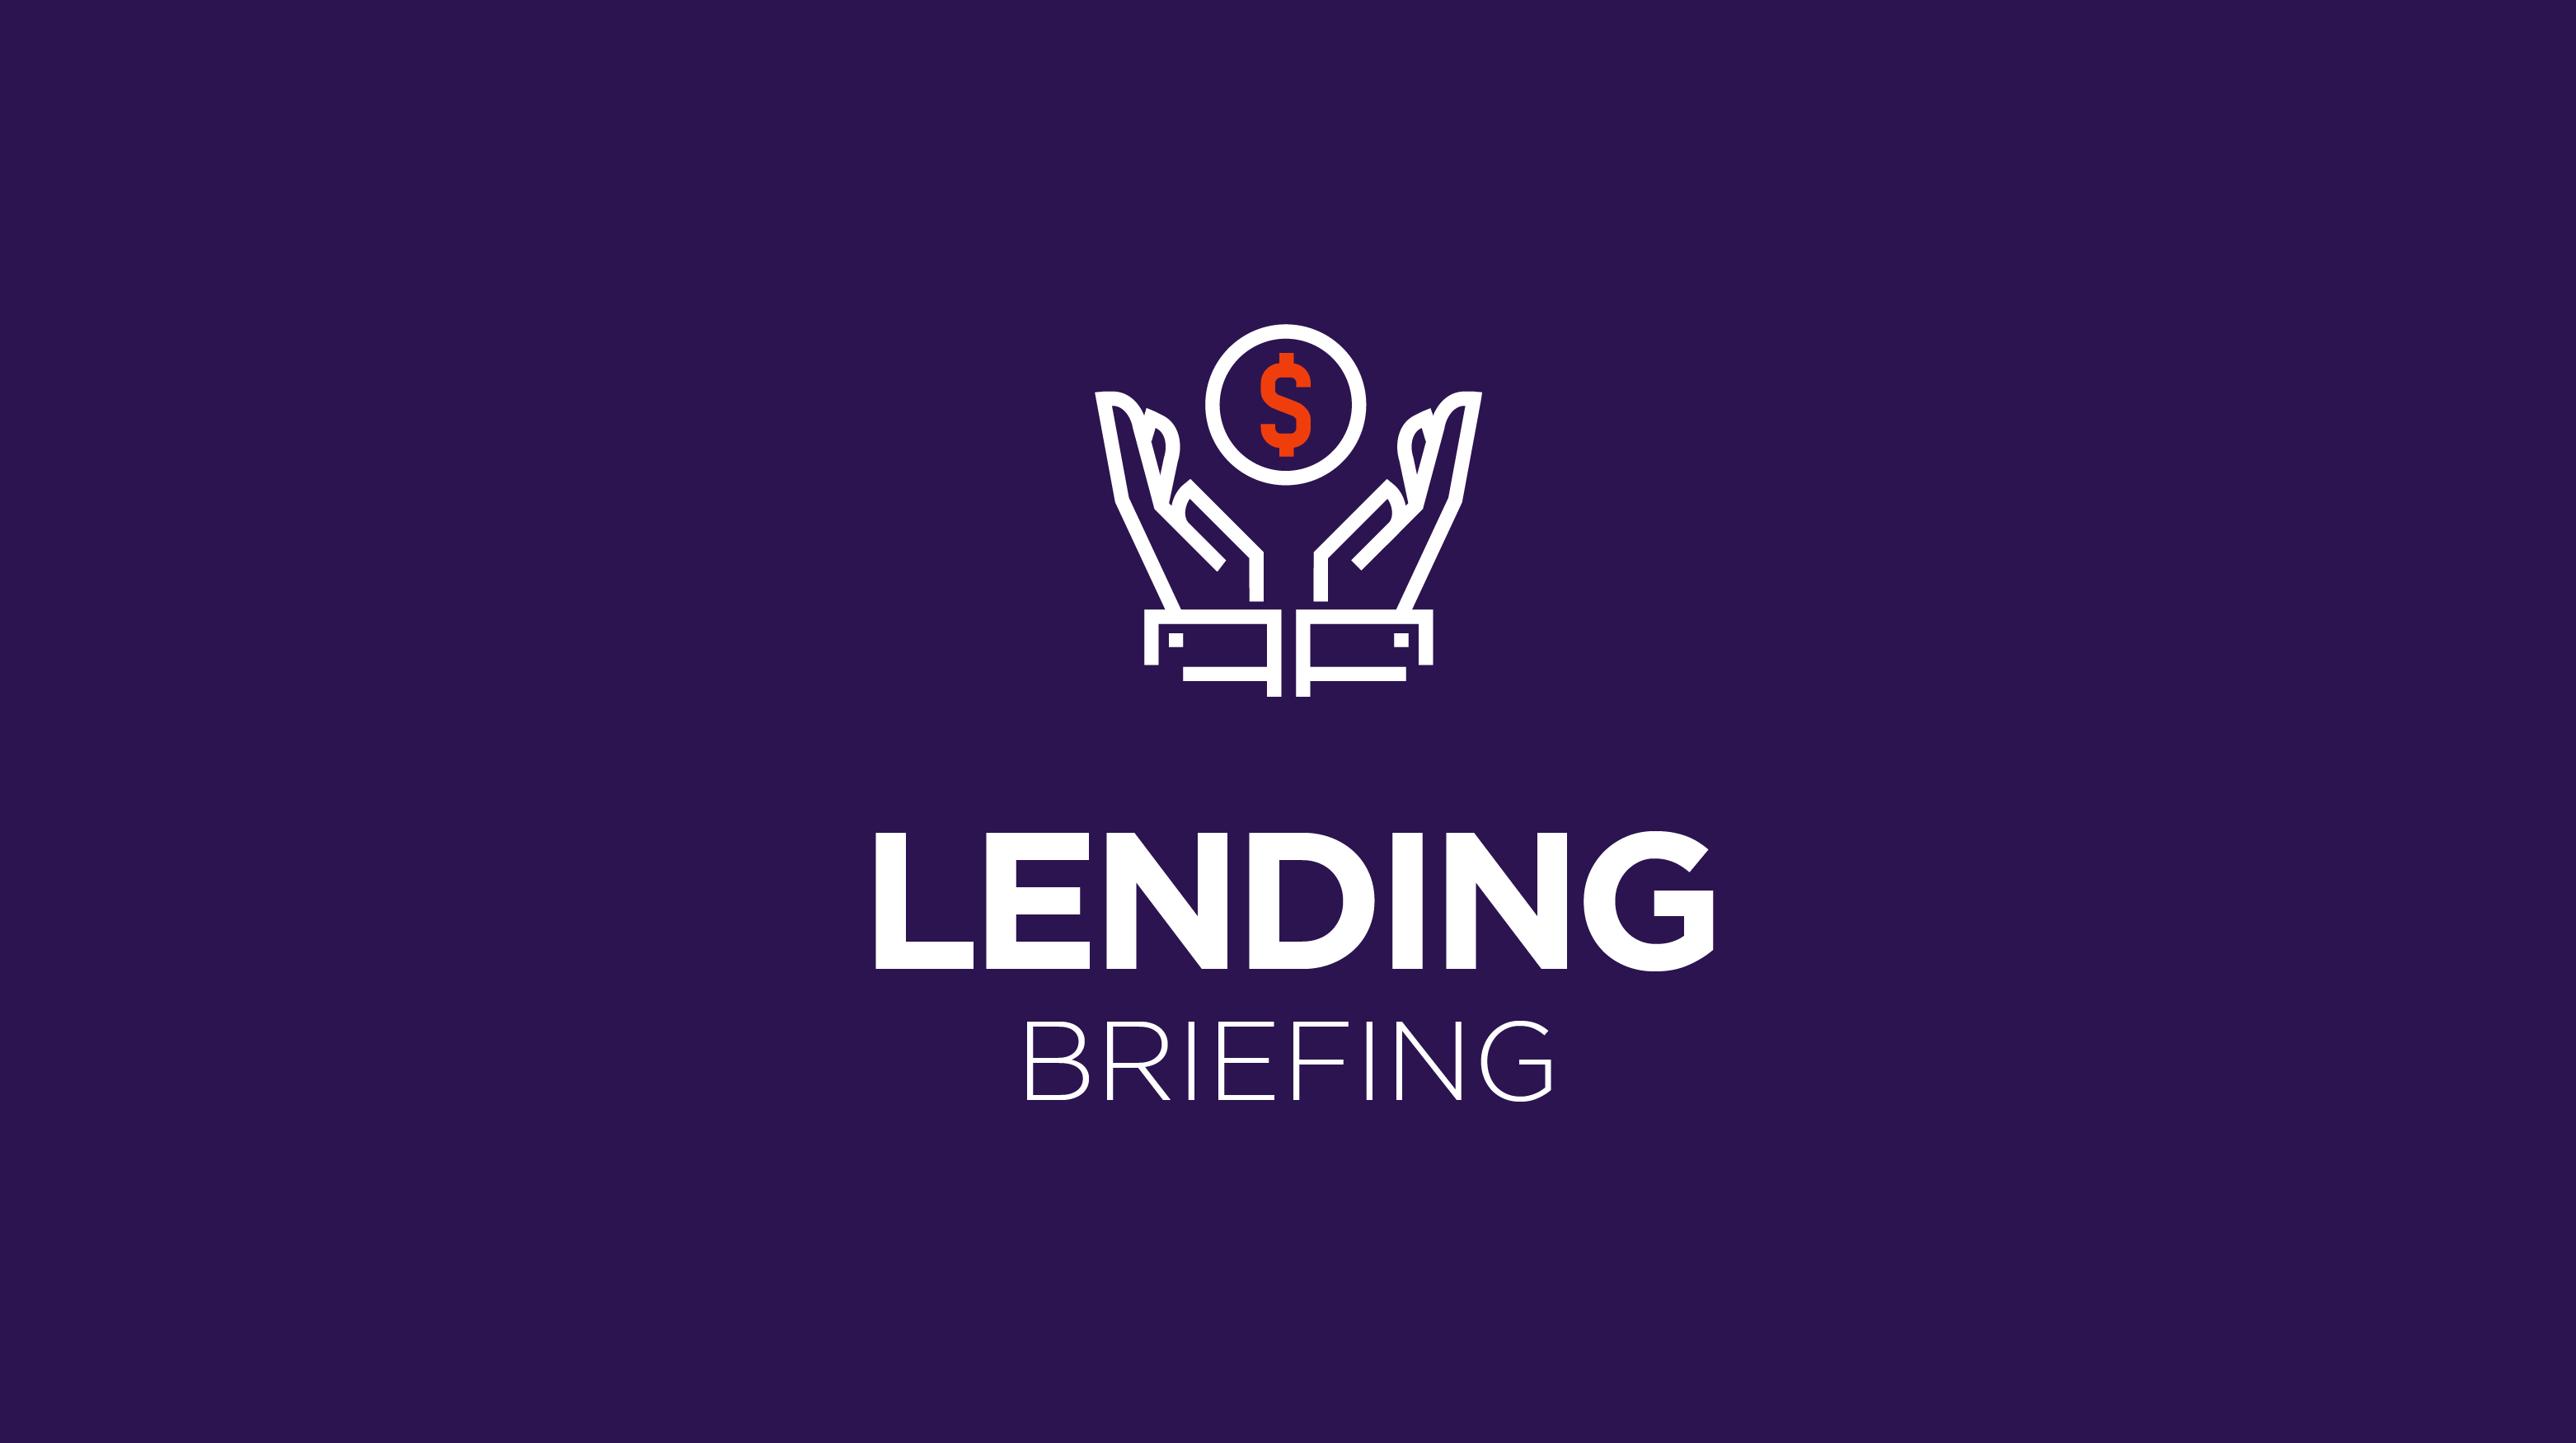 Lending Briefing: Embedded lending in a platform economy and Square dominating SMB financing